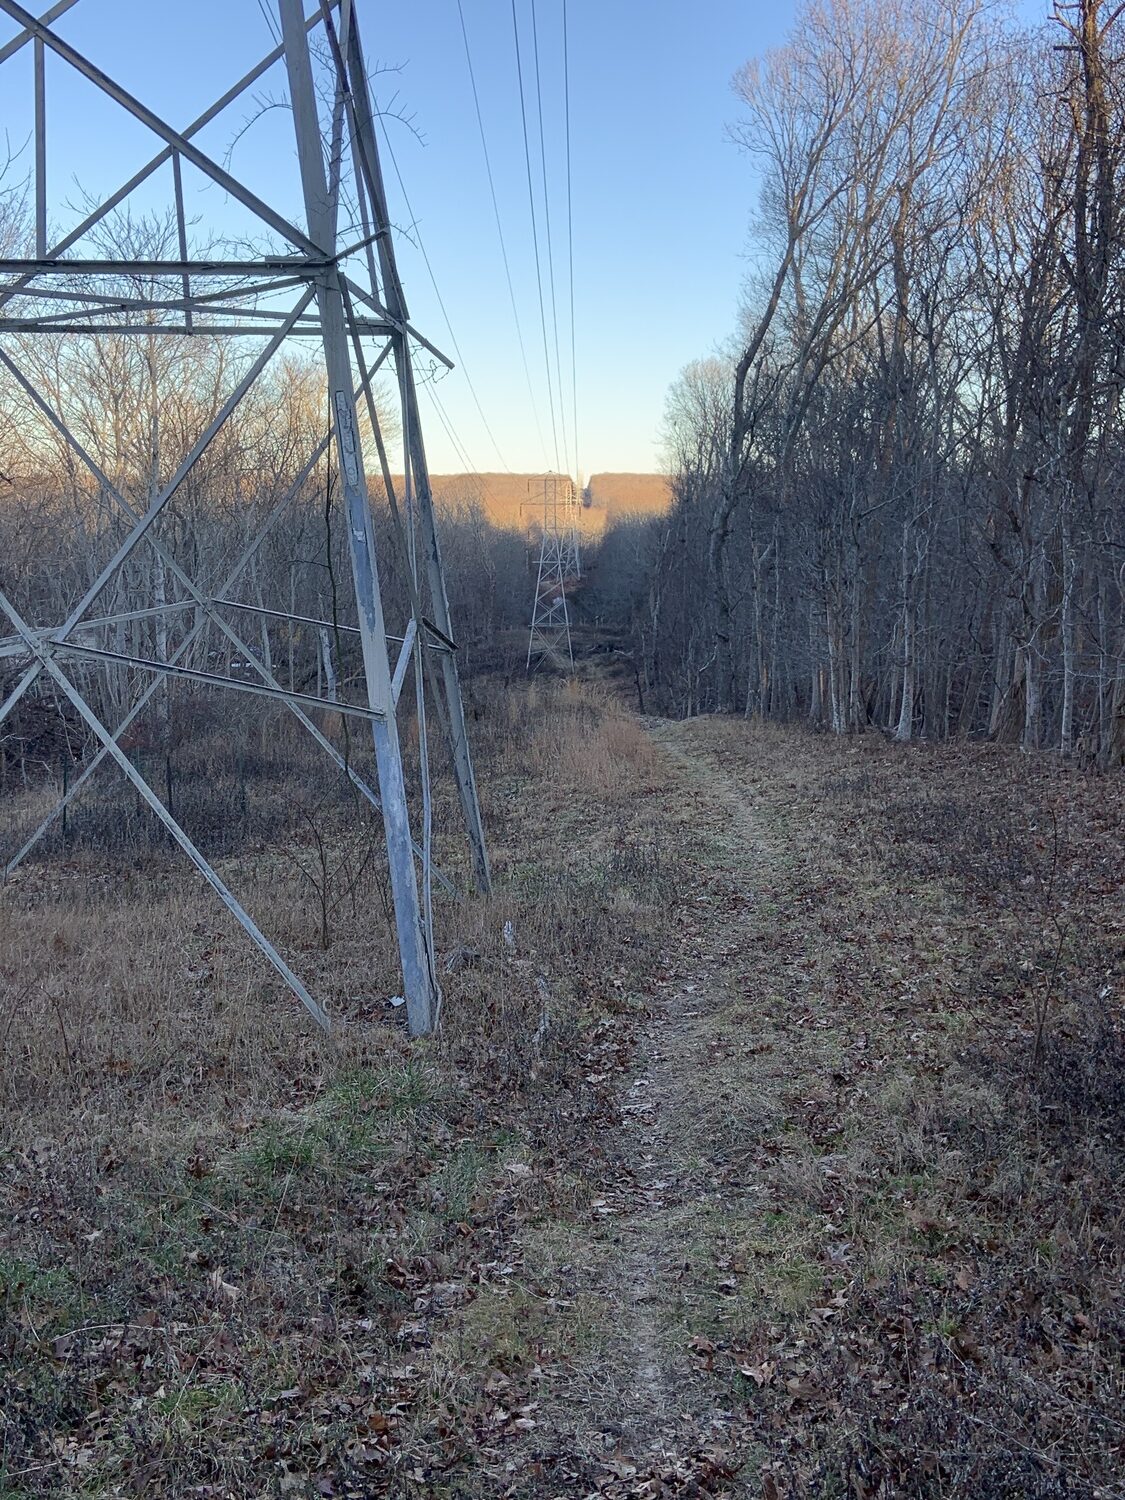 PSEG — Long Island has abandoned a plan to bury a new power line in its right-of-way through the Long Pond Greenbelt. STEPHEN J. KOTZ